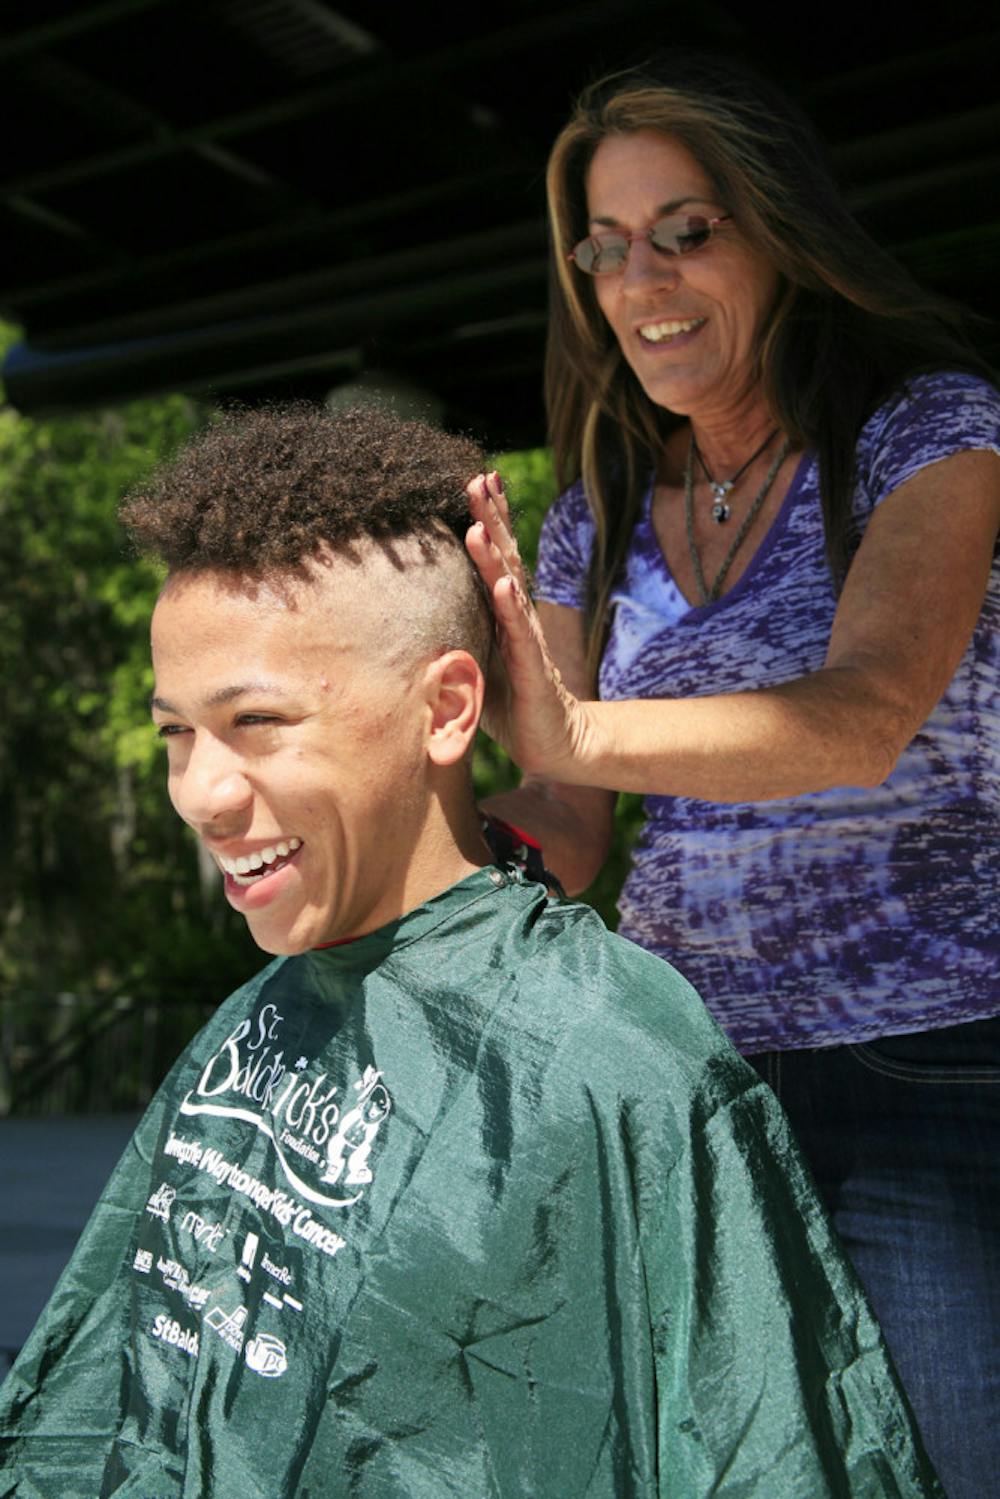 <p>Stylist Marguerite Toigo shaves the head of 18-year-old environmental science freshman Alec Cronin at the St. Baldrick's Festival on Friday. Cronin volunteered to have his head shaved at the event to help find a cure for childhood cancer. They raised about $11,000.</p>